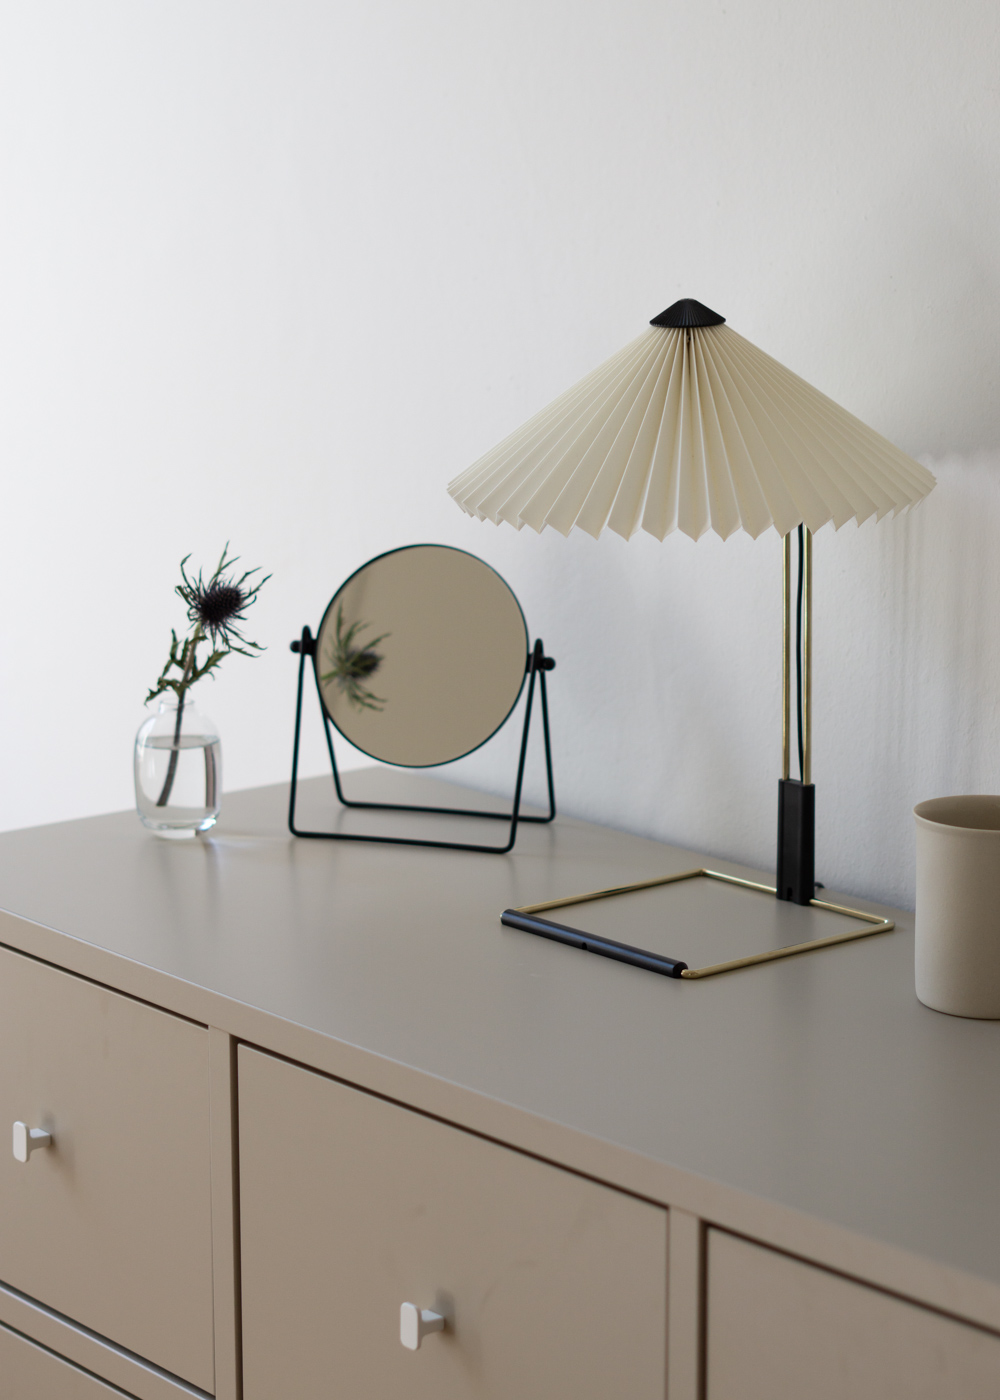 H&M Home Round Black Table Mirror, Hay Matin Lamp - Neutral Home, Scandinavian Interior, Natural Aesthetic, Minimalist Decor, Beige Style, RG Daily Blog